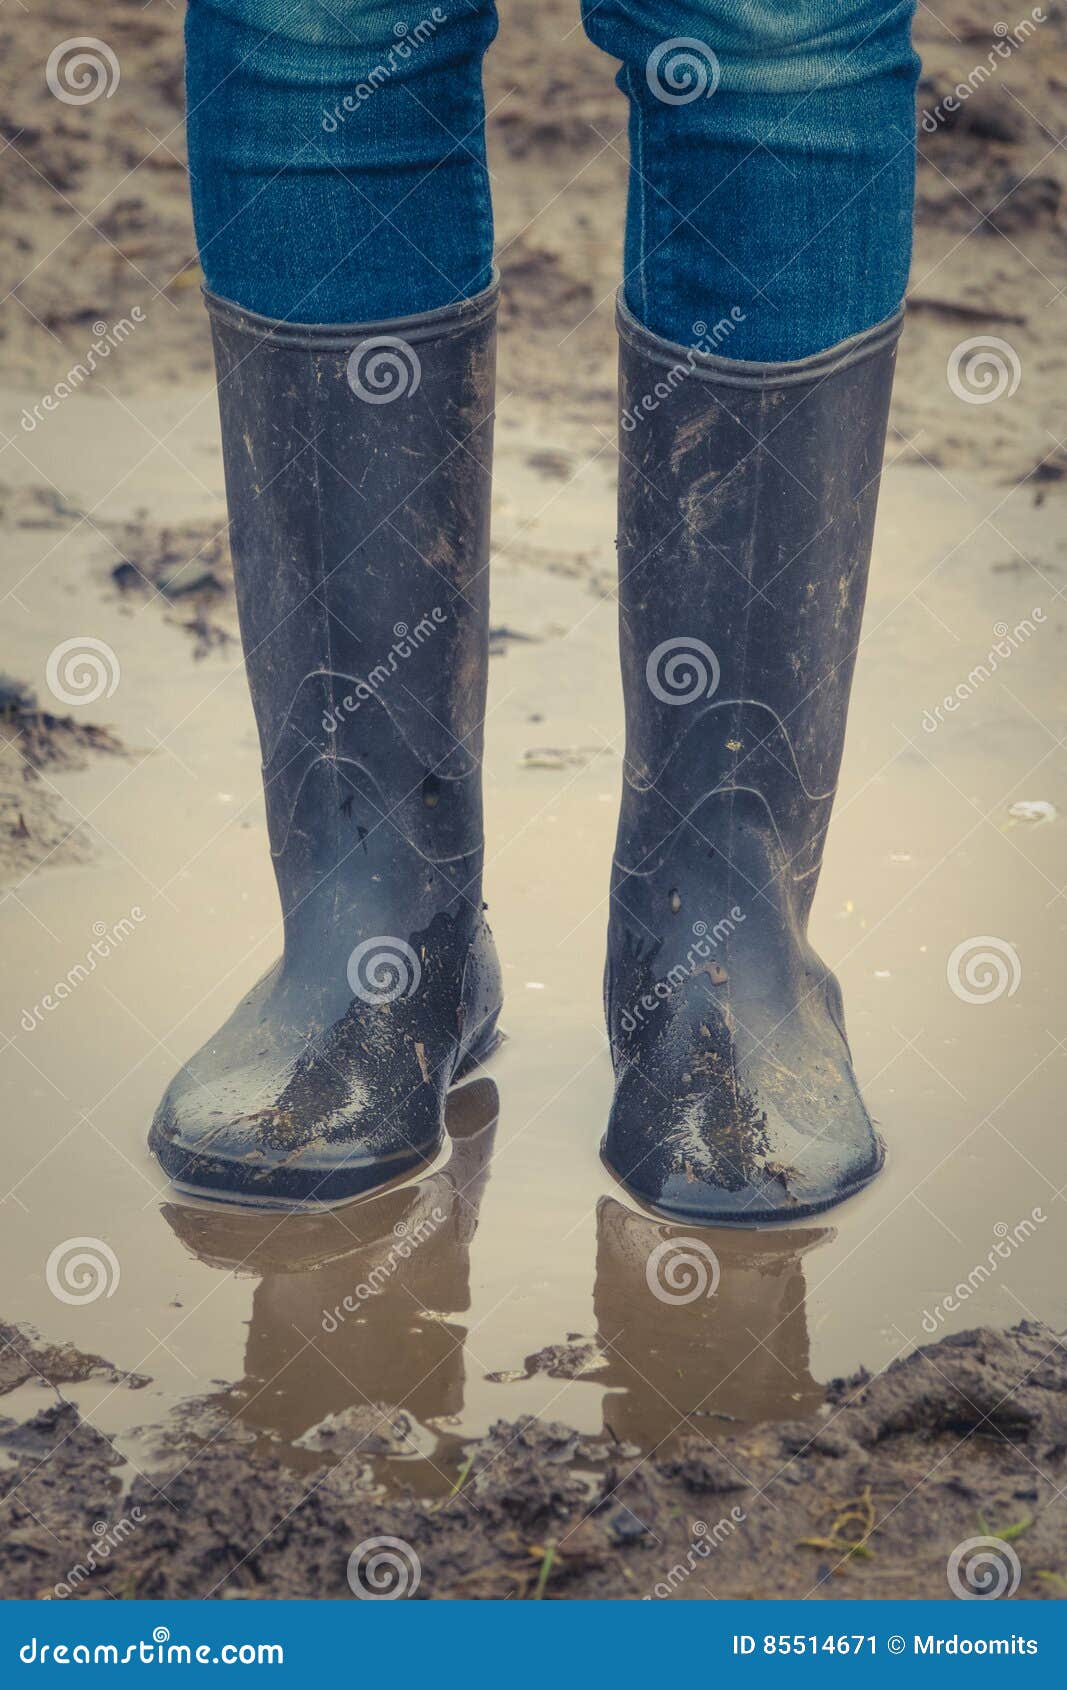 Child in Rubber Boots stock image. Image of autumn, muddy - 85514671